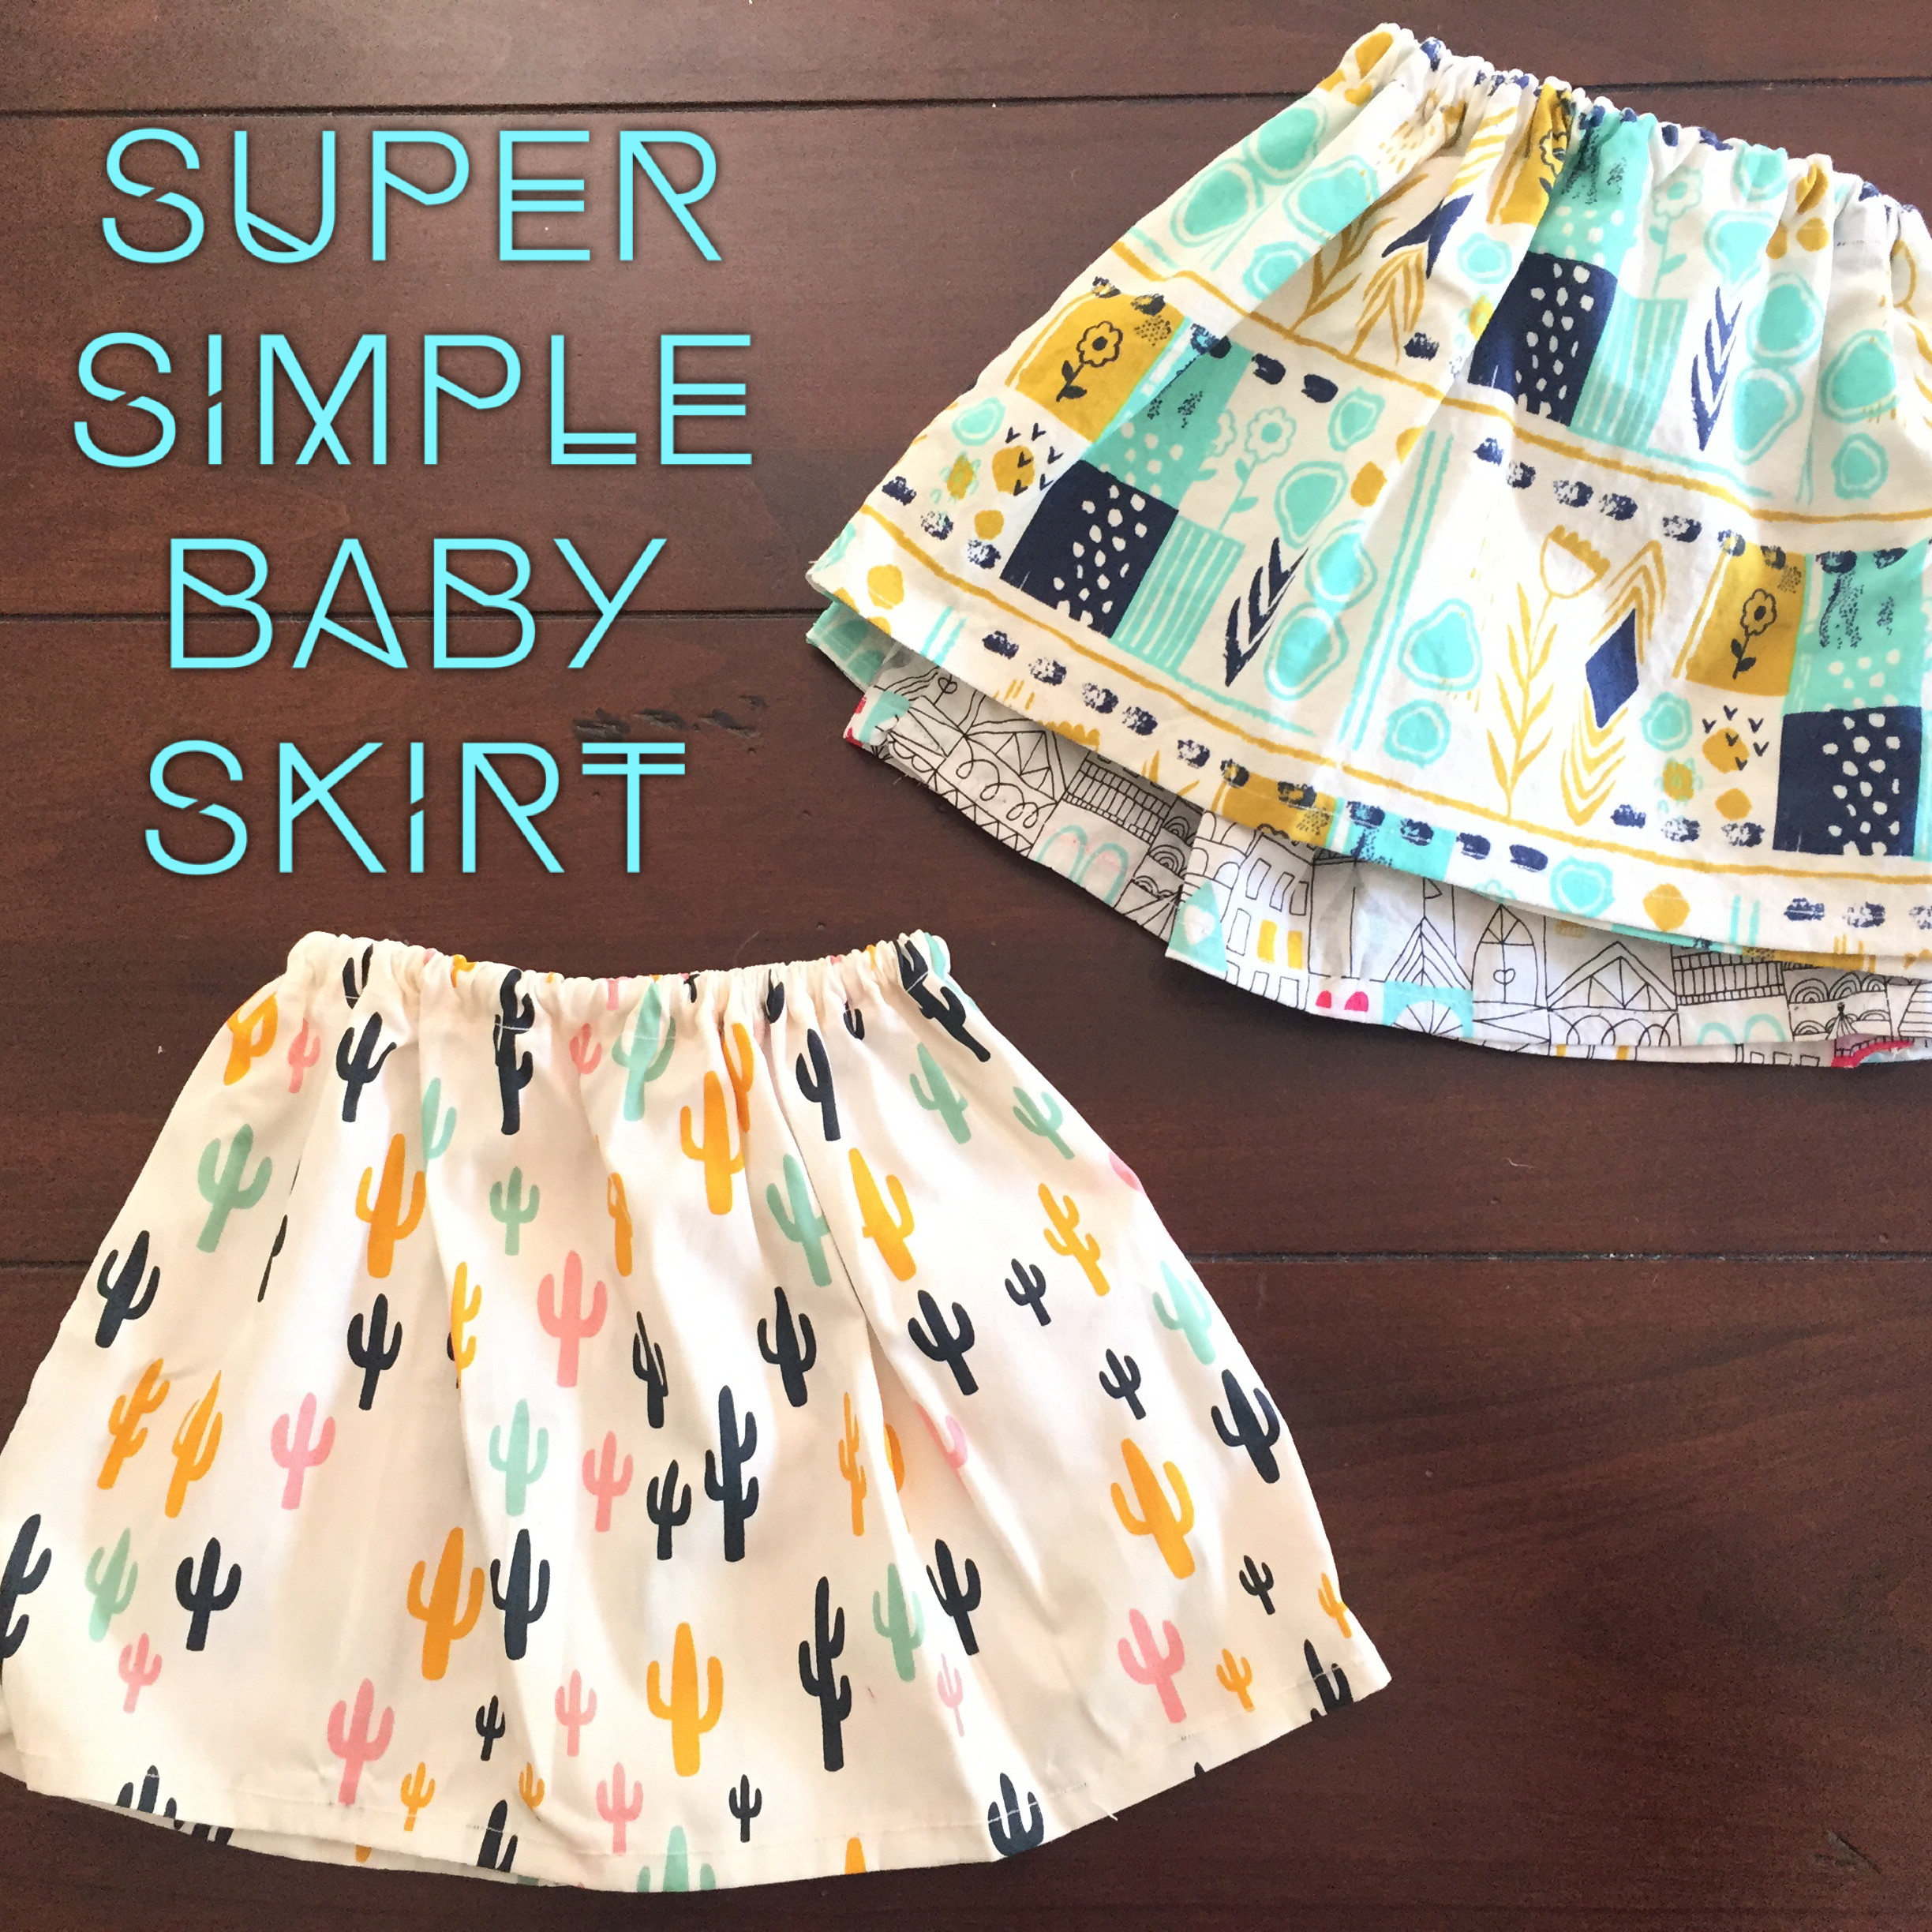 DIY Baby Sewing Projects
 super simple baby skirt sewing project – diy